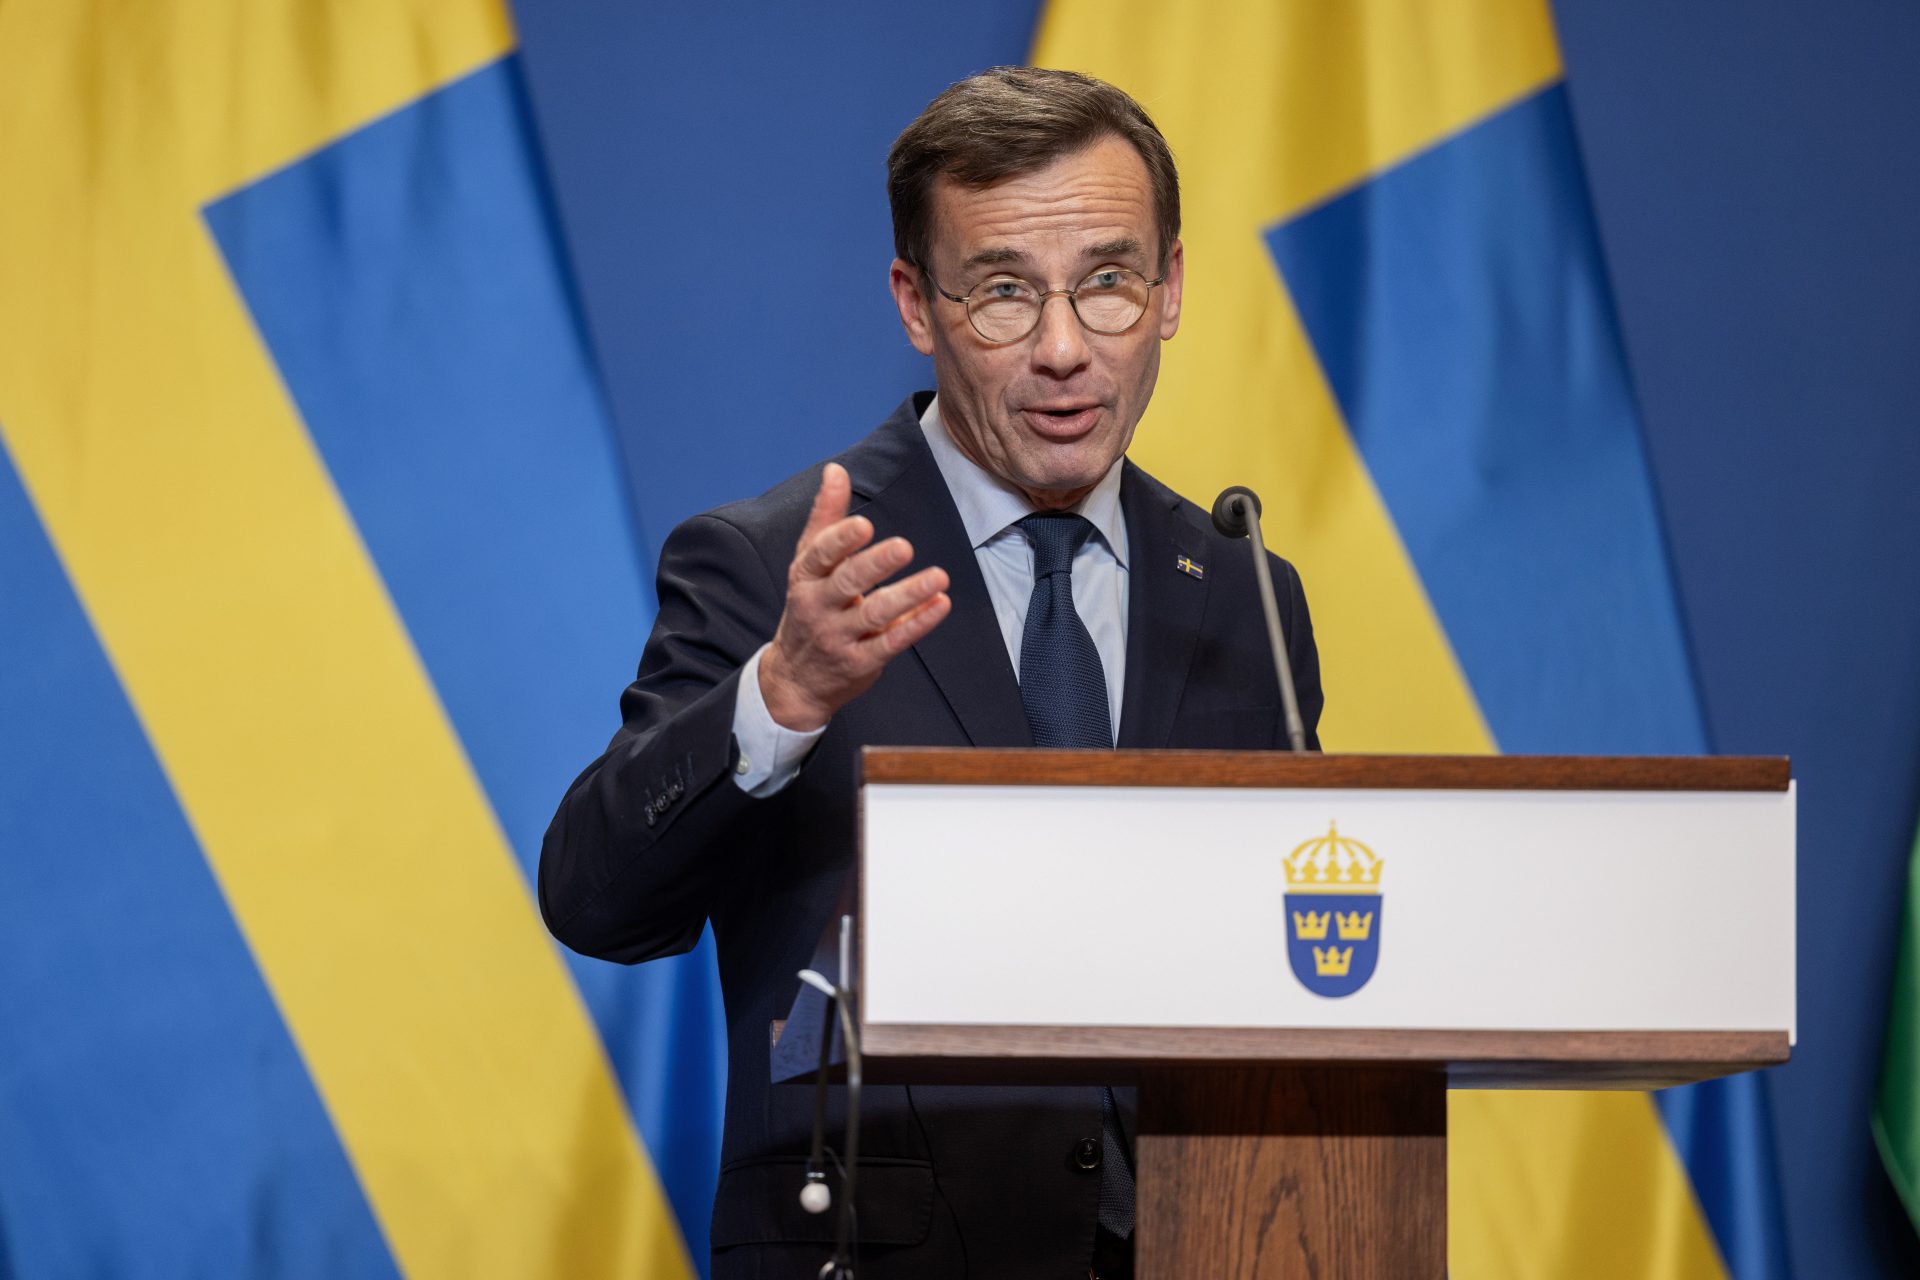 Sweden says sending troops is a “different matter”